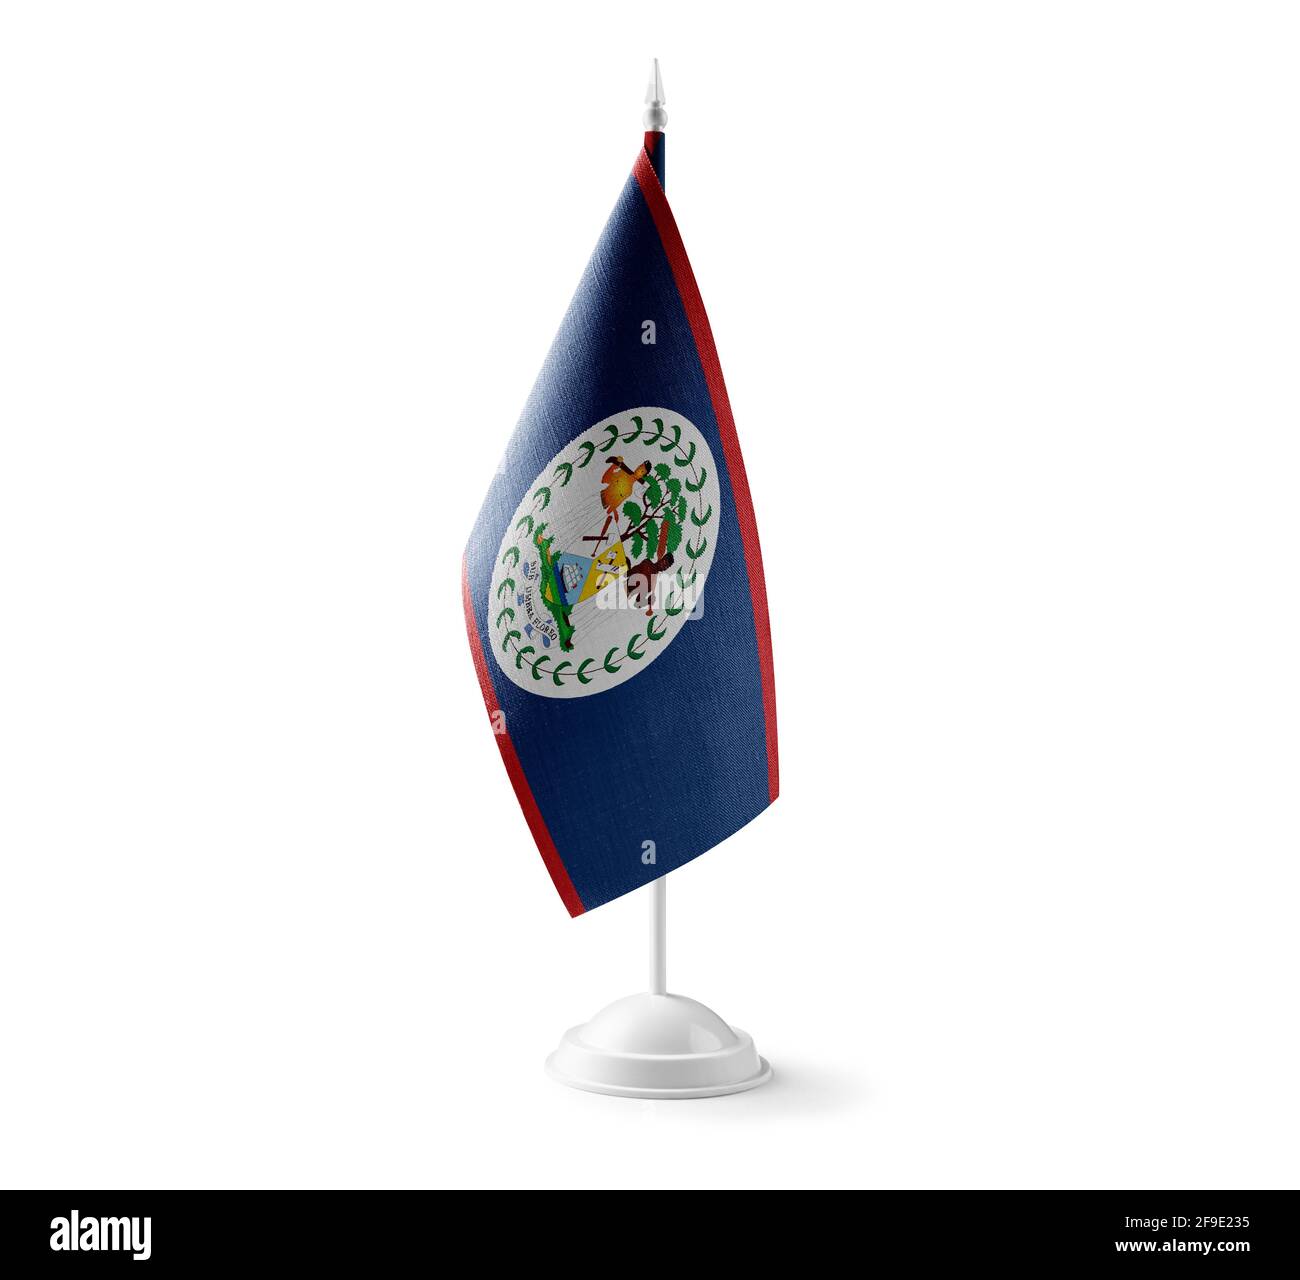 Small national flag of the Belize on a white background Stock Photo